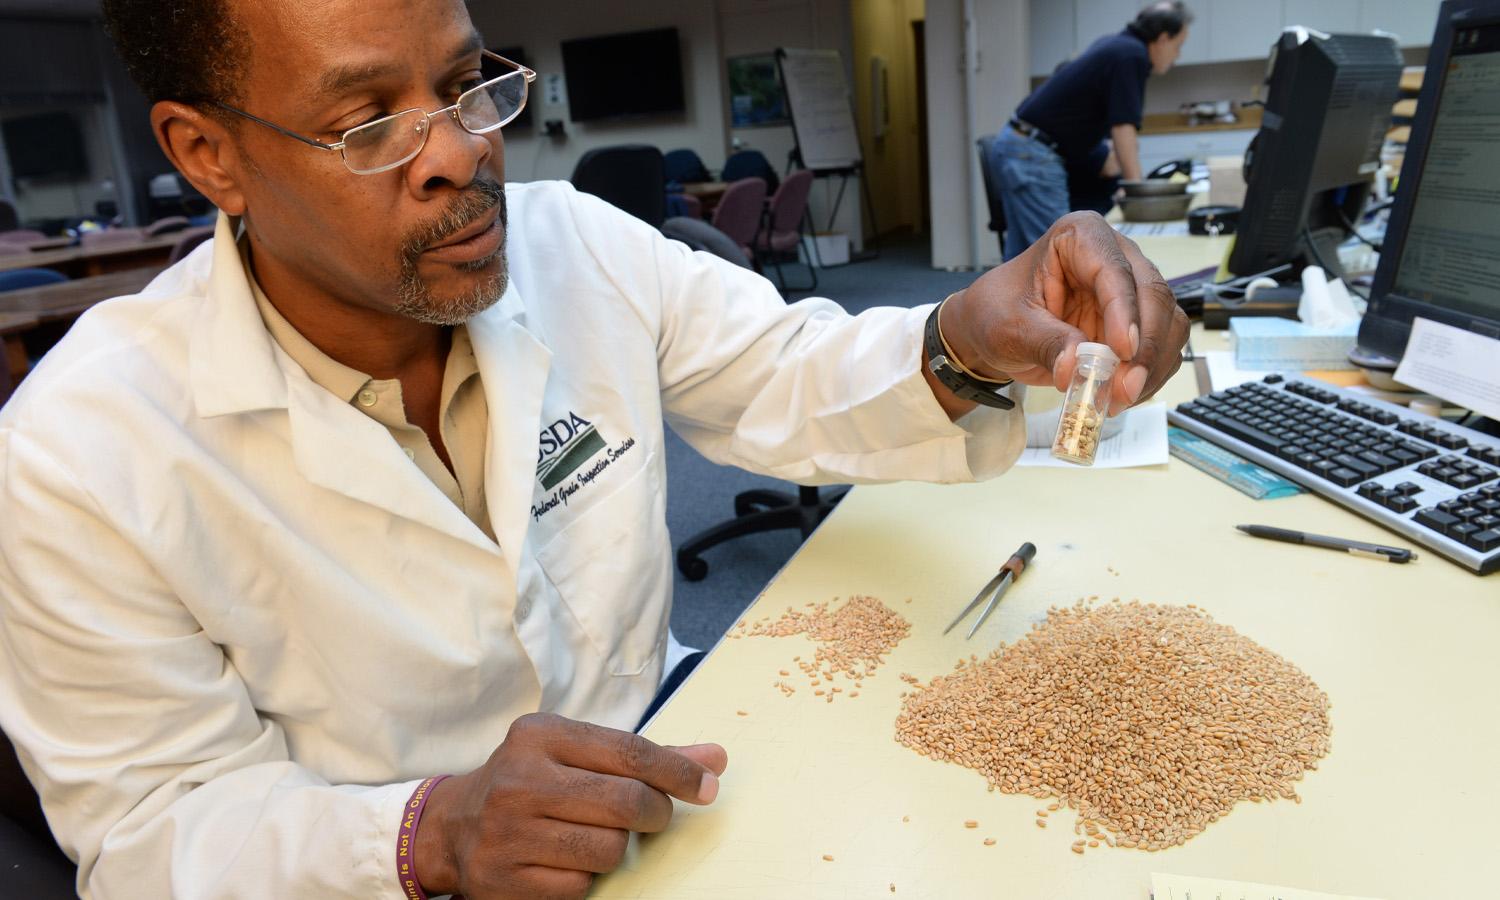 A USDA scientist inspects grains.